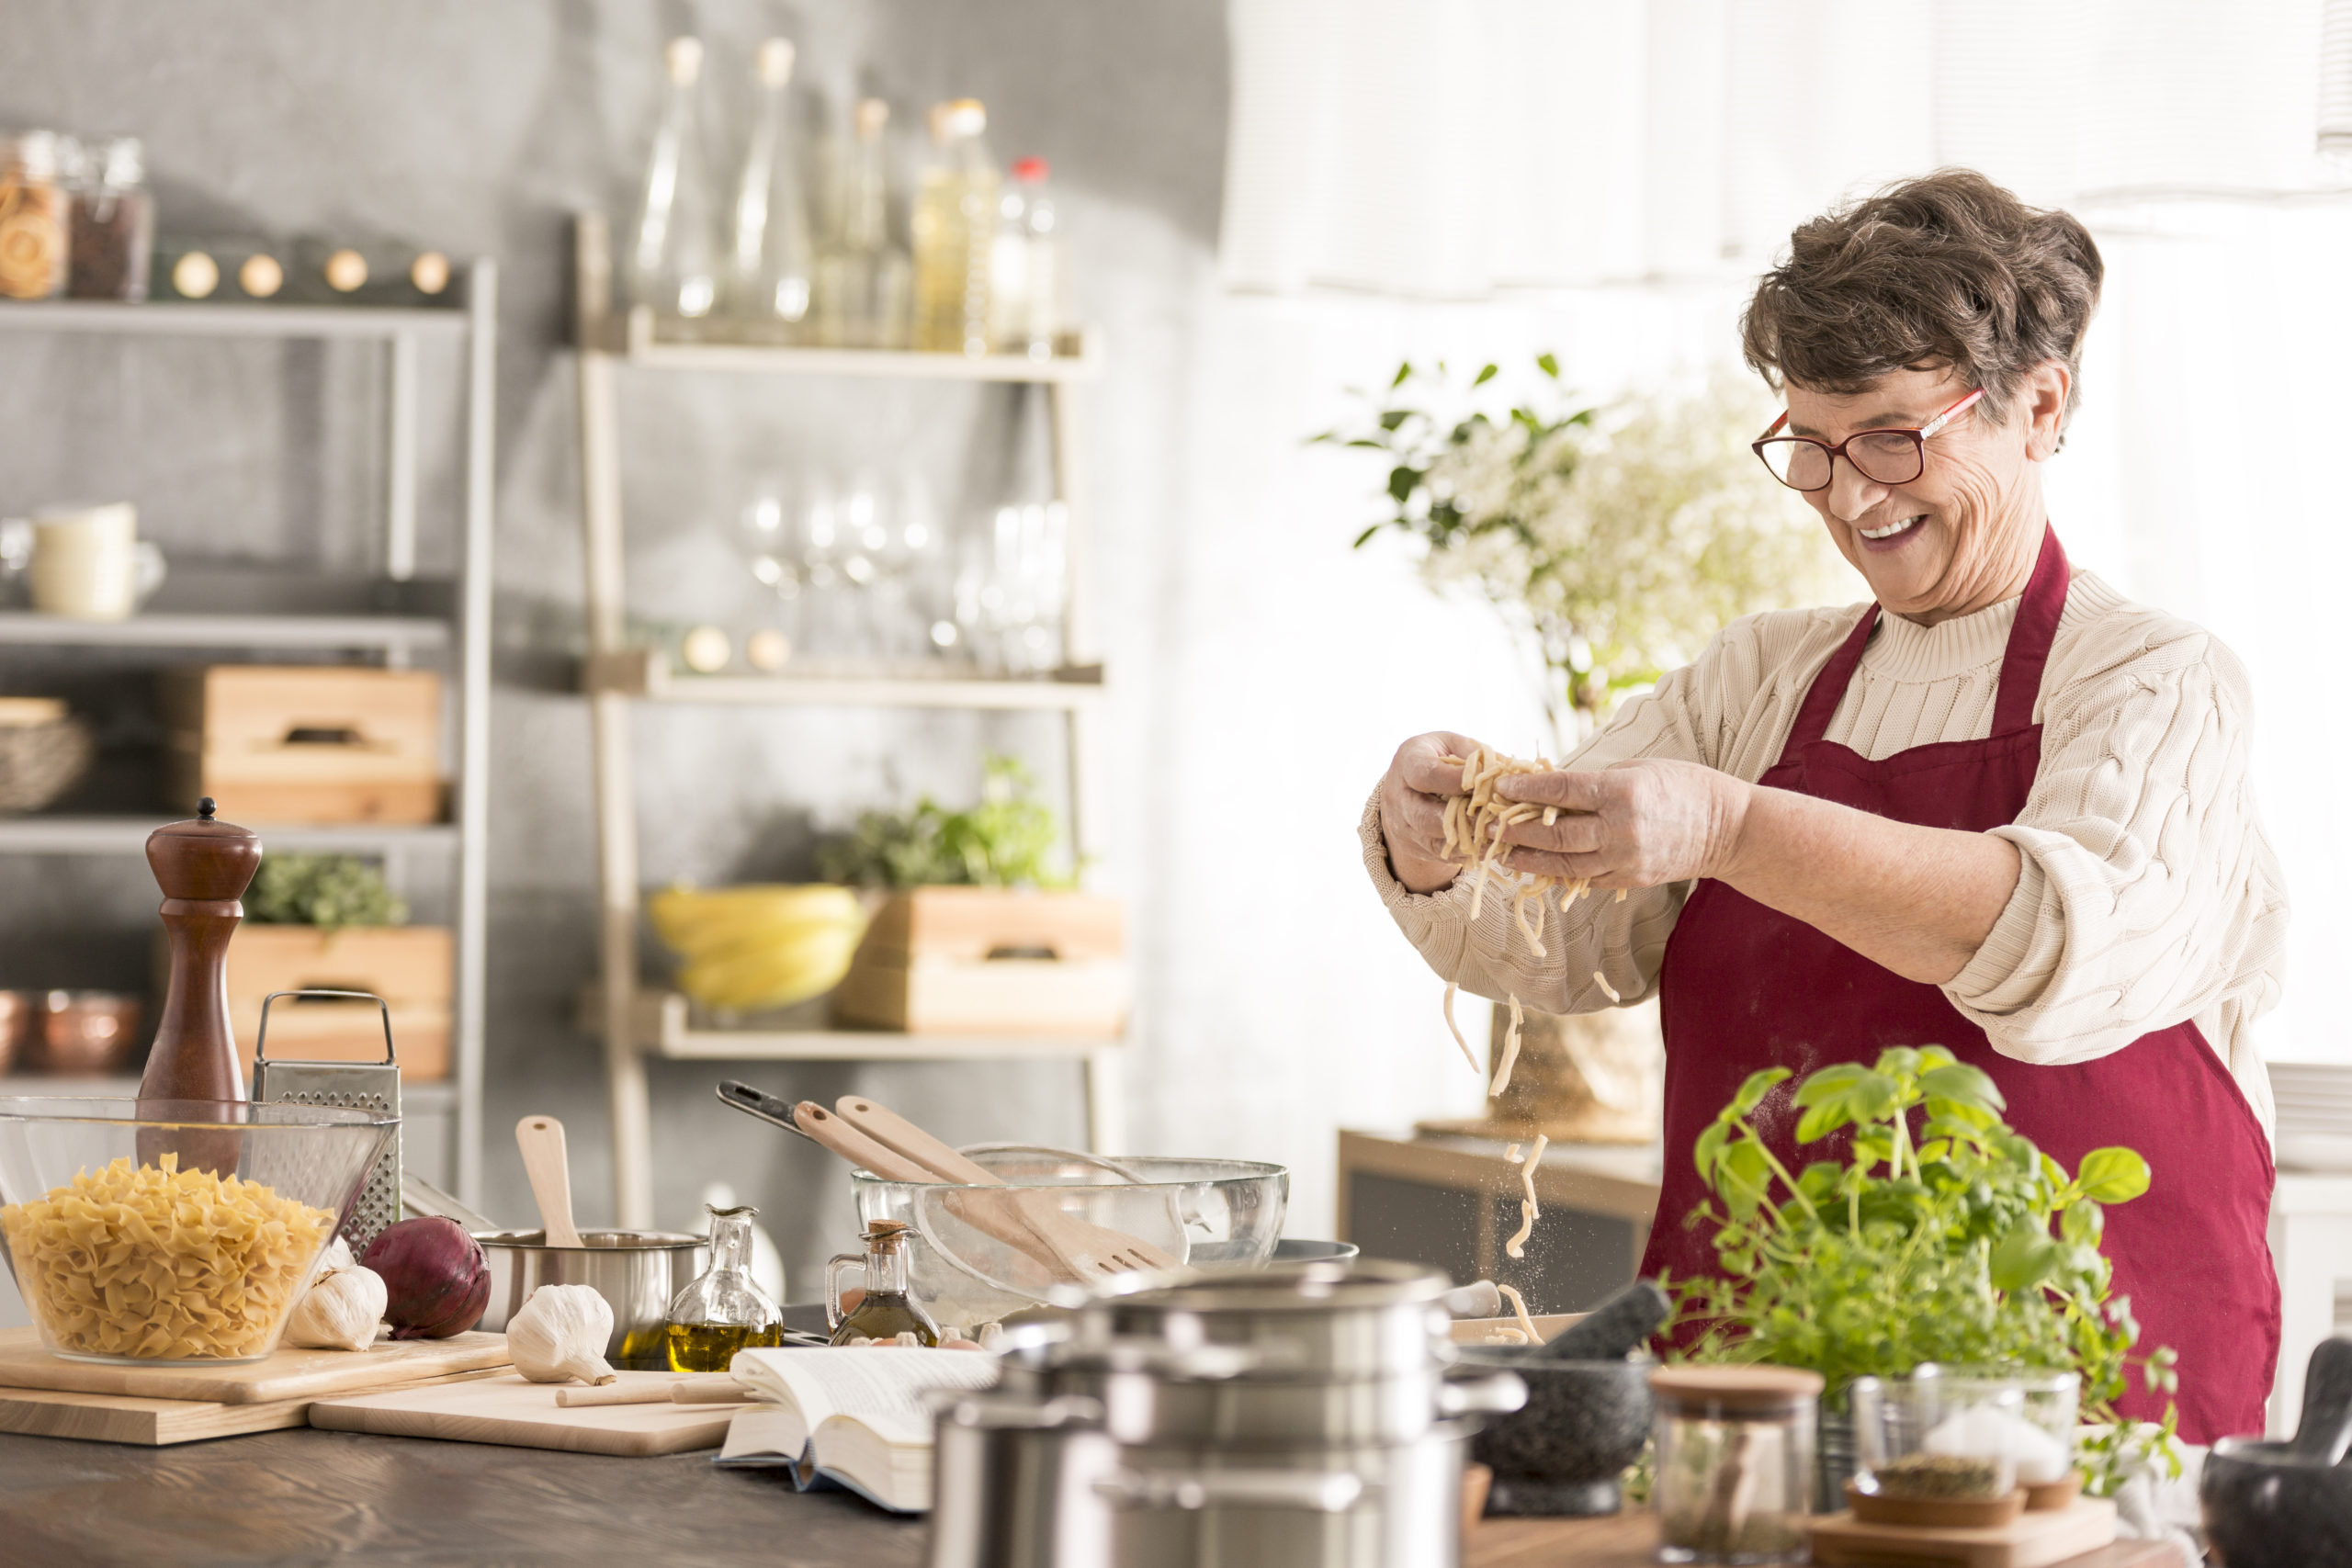  While cooking in the kitchen alone, a woman feels safe knowing her fall detection alert system will protect her. 